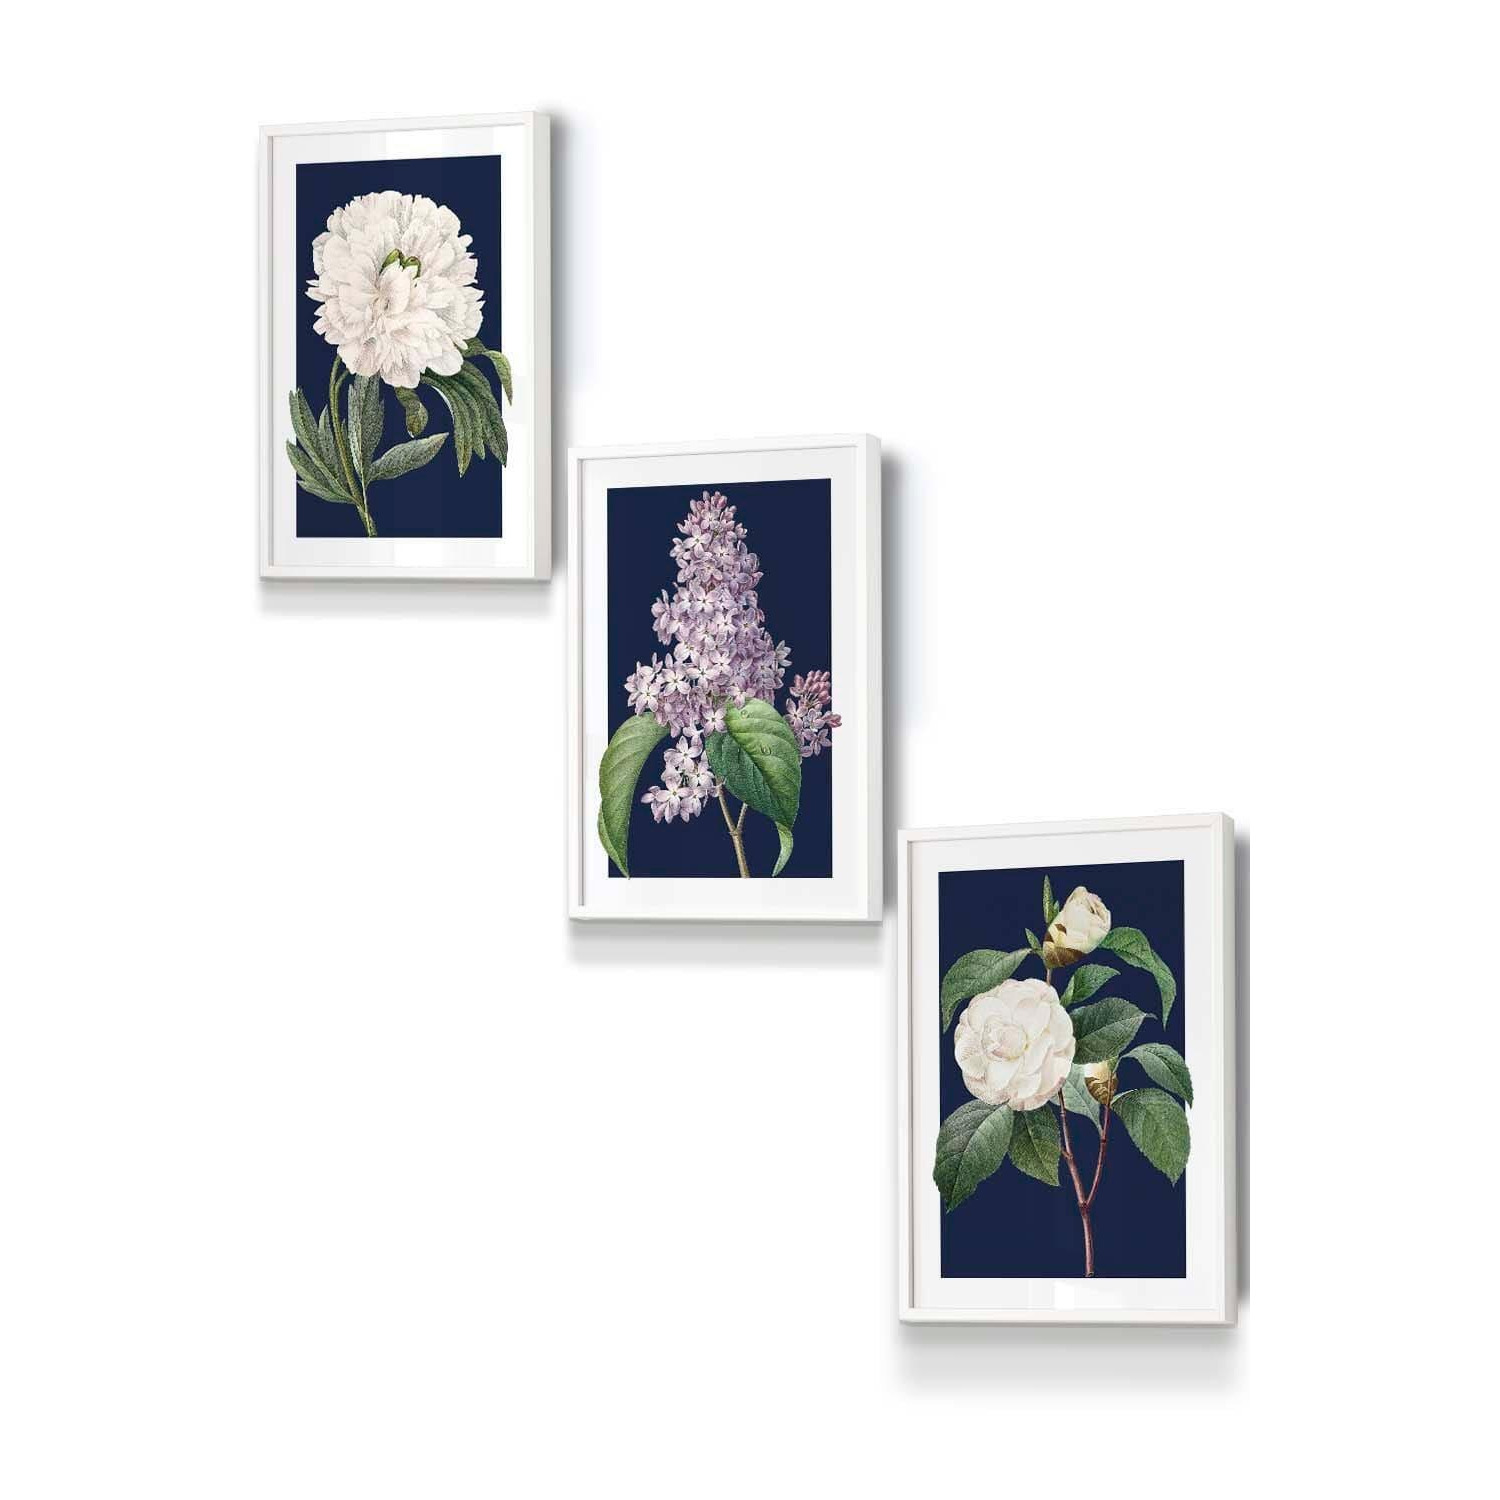 Set of 3 White Framed Vintage Flowers Lilac, Peony and Camellia on Navy Blue Wall Art - image 1